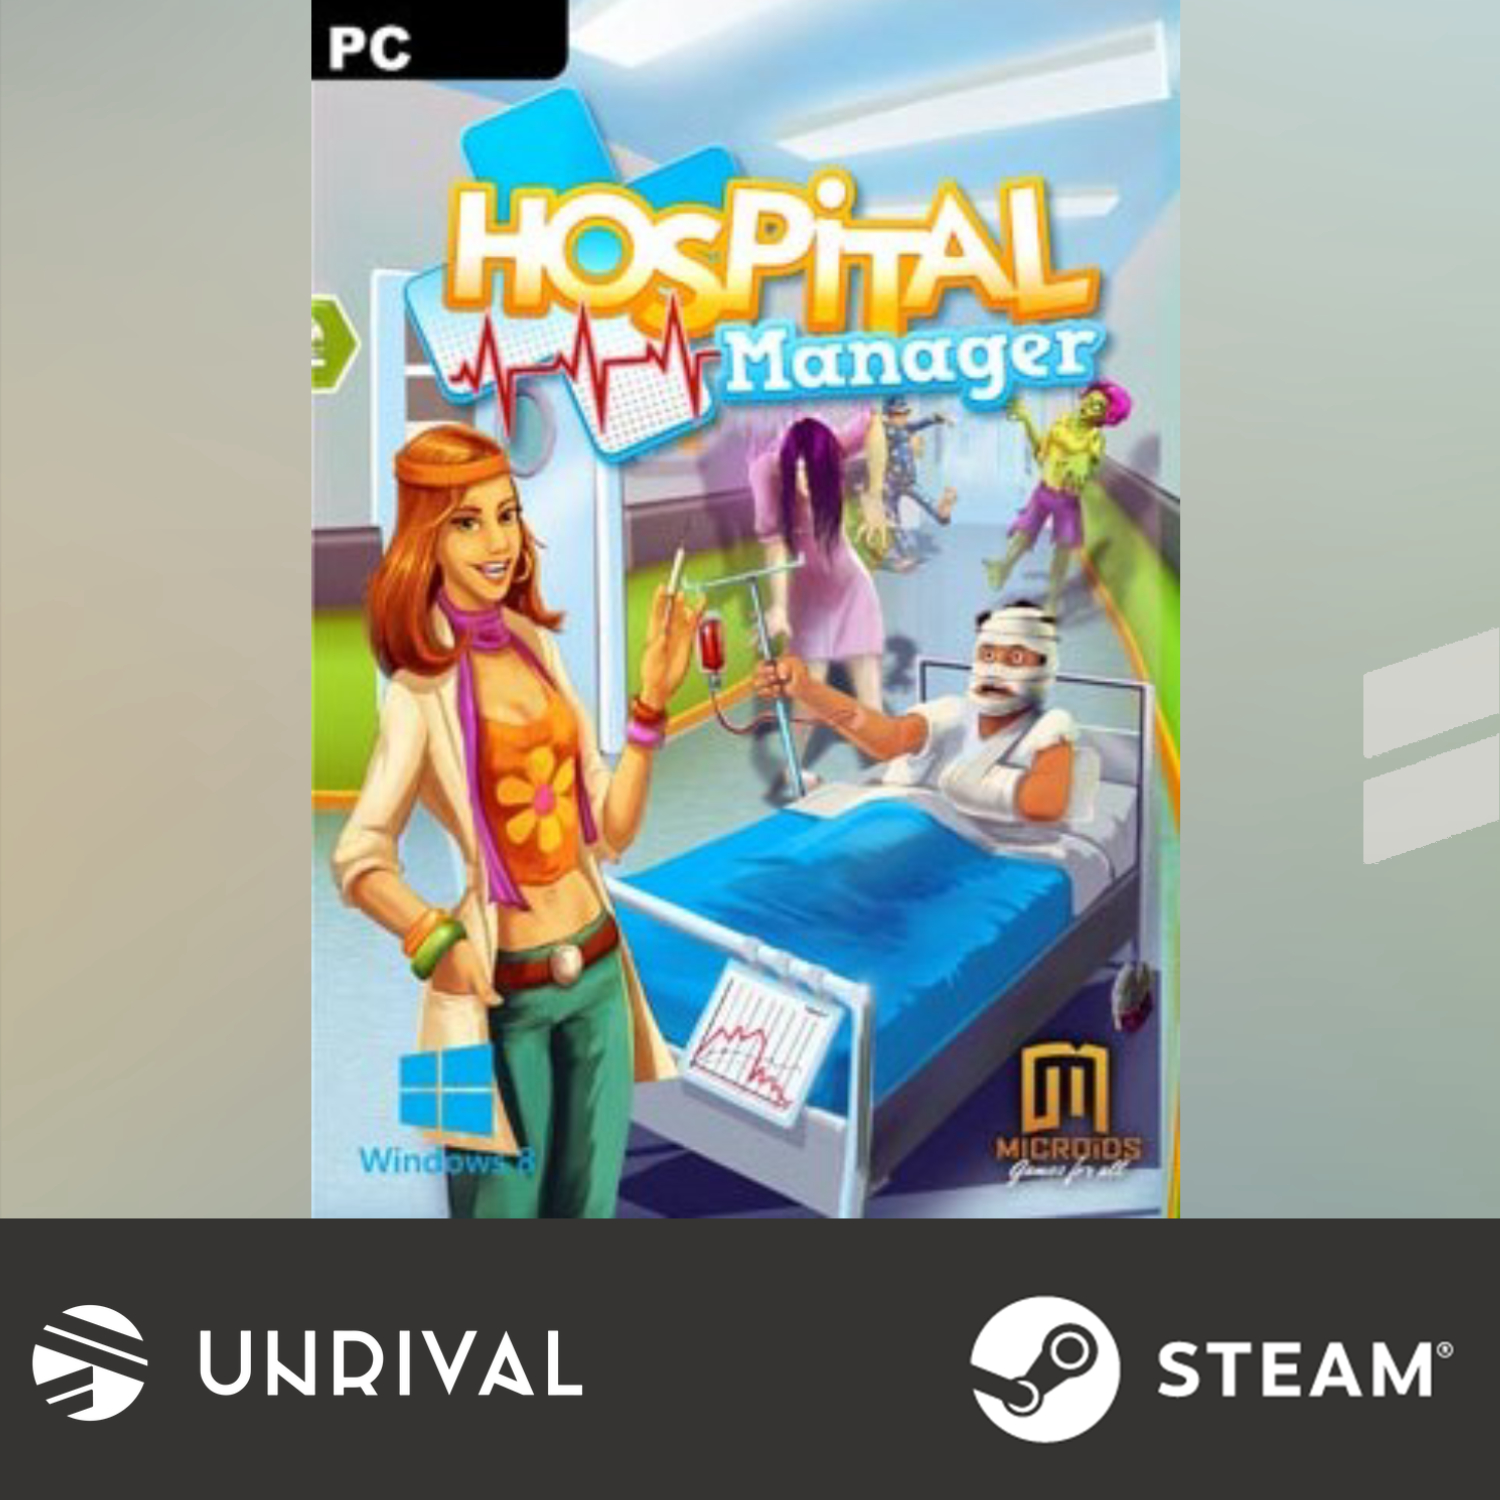 [Hot Sale] Hospital Manager PC Digital Download Game (Single Player) - Unrival